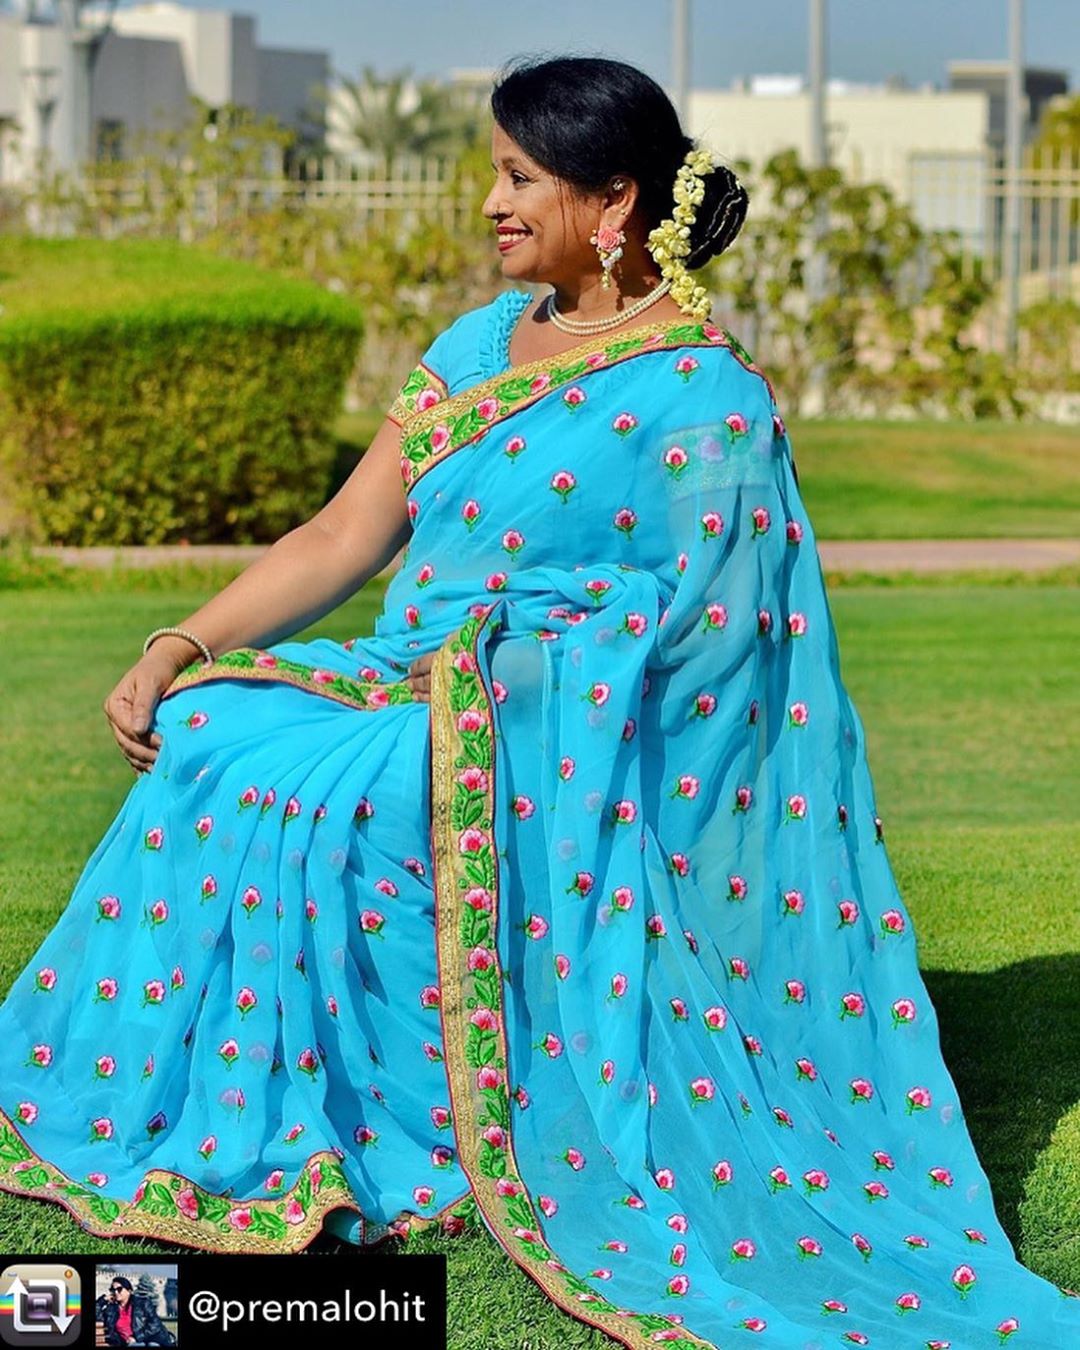 Mirraw - @premalohit looks amazing in the sky blue embroidered georgette saree.
Check out the amazing saree collection at our #gisf festival on @mirraw.
last few hours left.
50-80% off.
product ID:226...